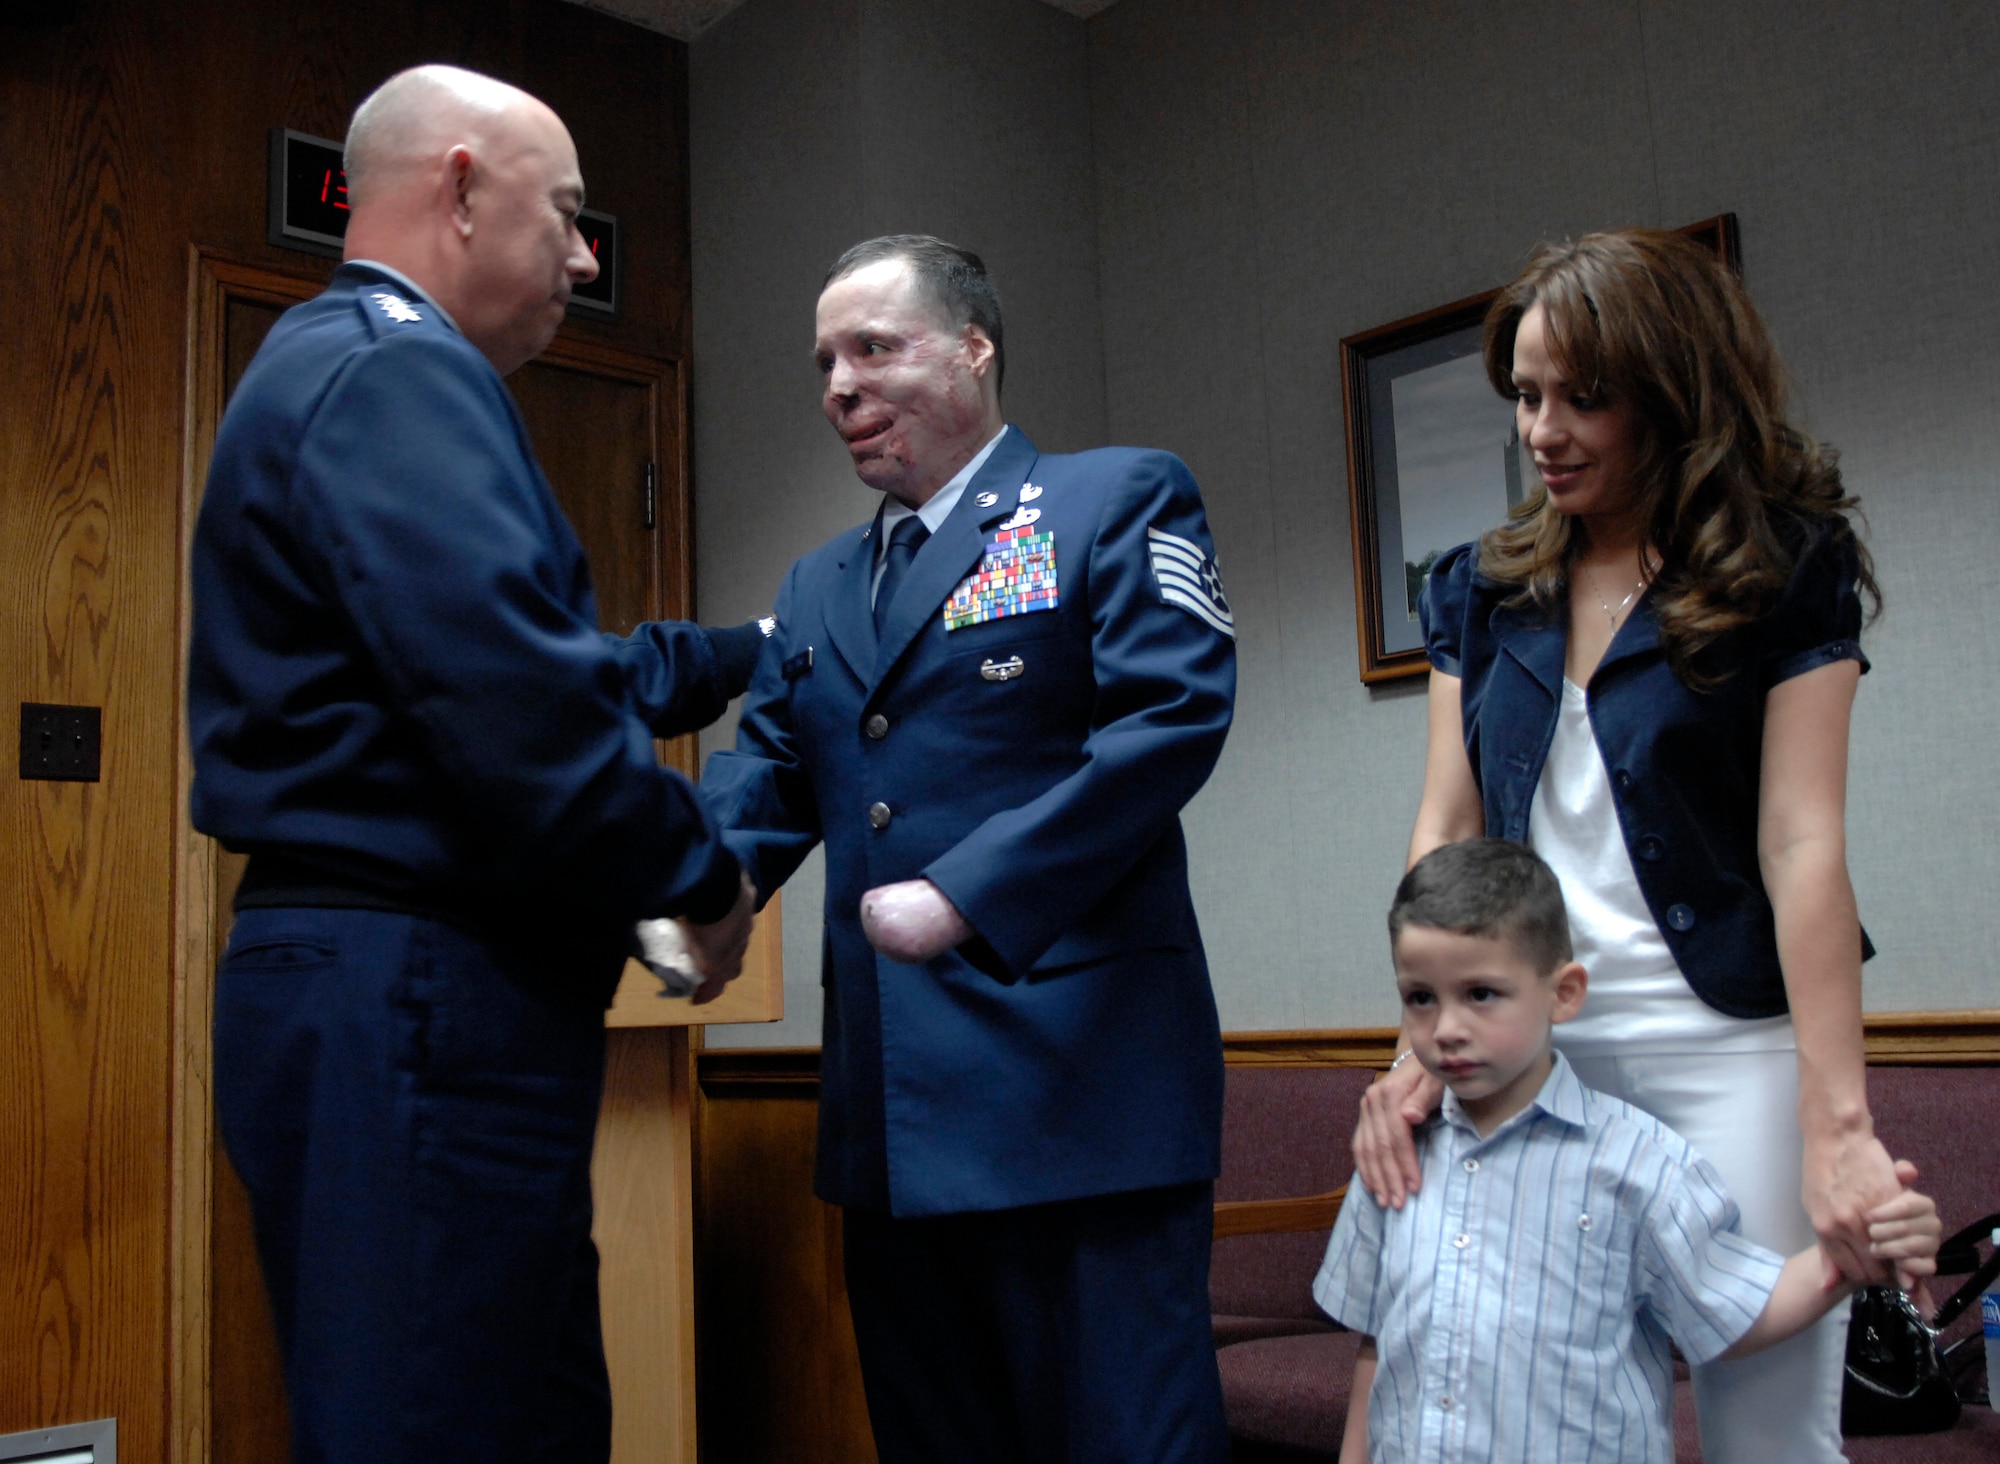 Air Force Chief of Staff Gen. T. Michael Moseley congratulates Tech. Sgt. Israel Del Toro after promoting him at a ceremony at Randolph Air Force Base, Texas, Feb. 22. Part of the small group of guests at the event were the sergeant's wife, Carmen, and son, Israel. The sergeant received burns over more than 80 percent of his body while on a combat patrol in Afghanistan in December 2005. (U.S. Air Force photo/Staff Sgt. Brian Ferguson)